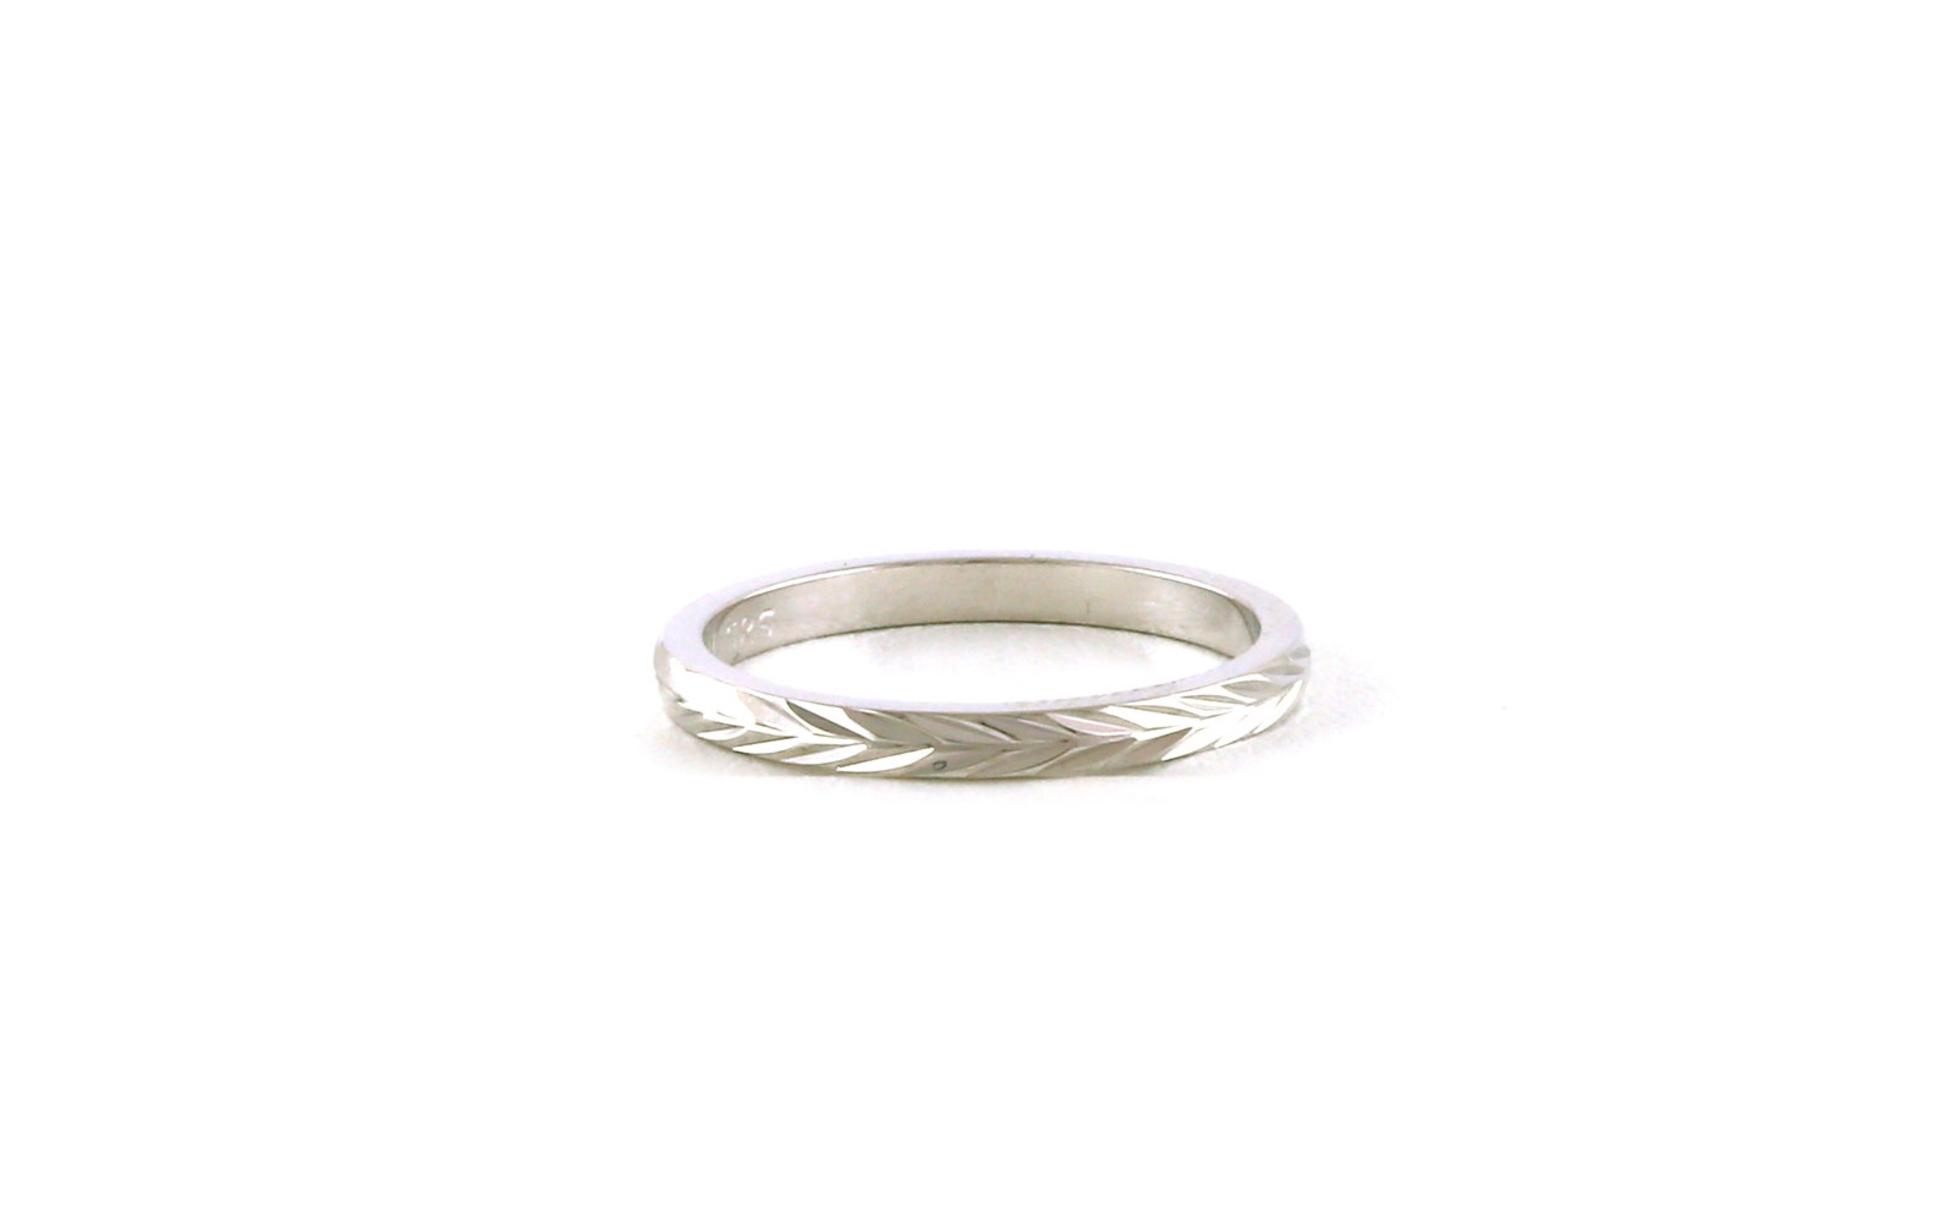 Wheat Pattern Hand Engraved Wedding Band in White Gold 